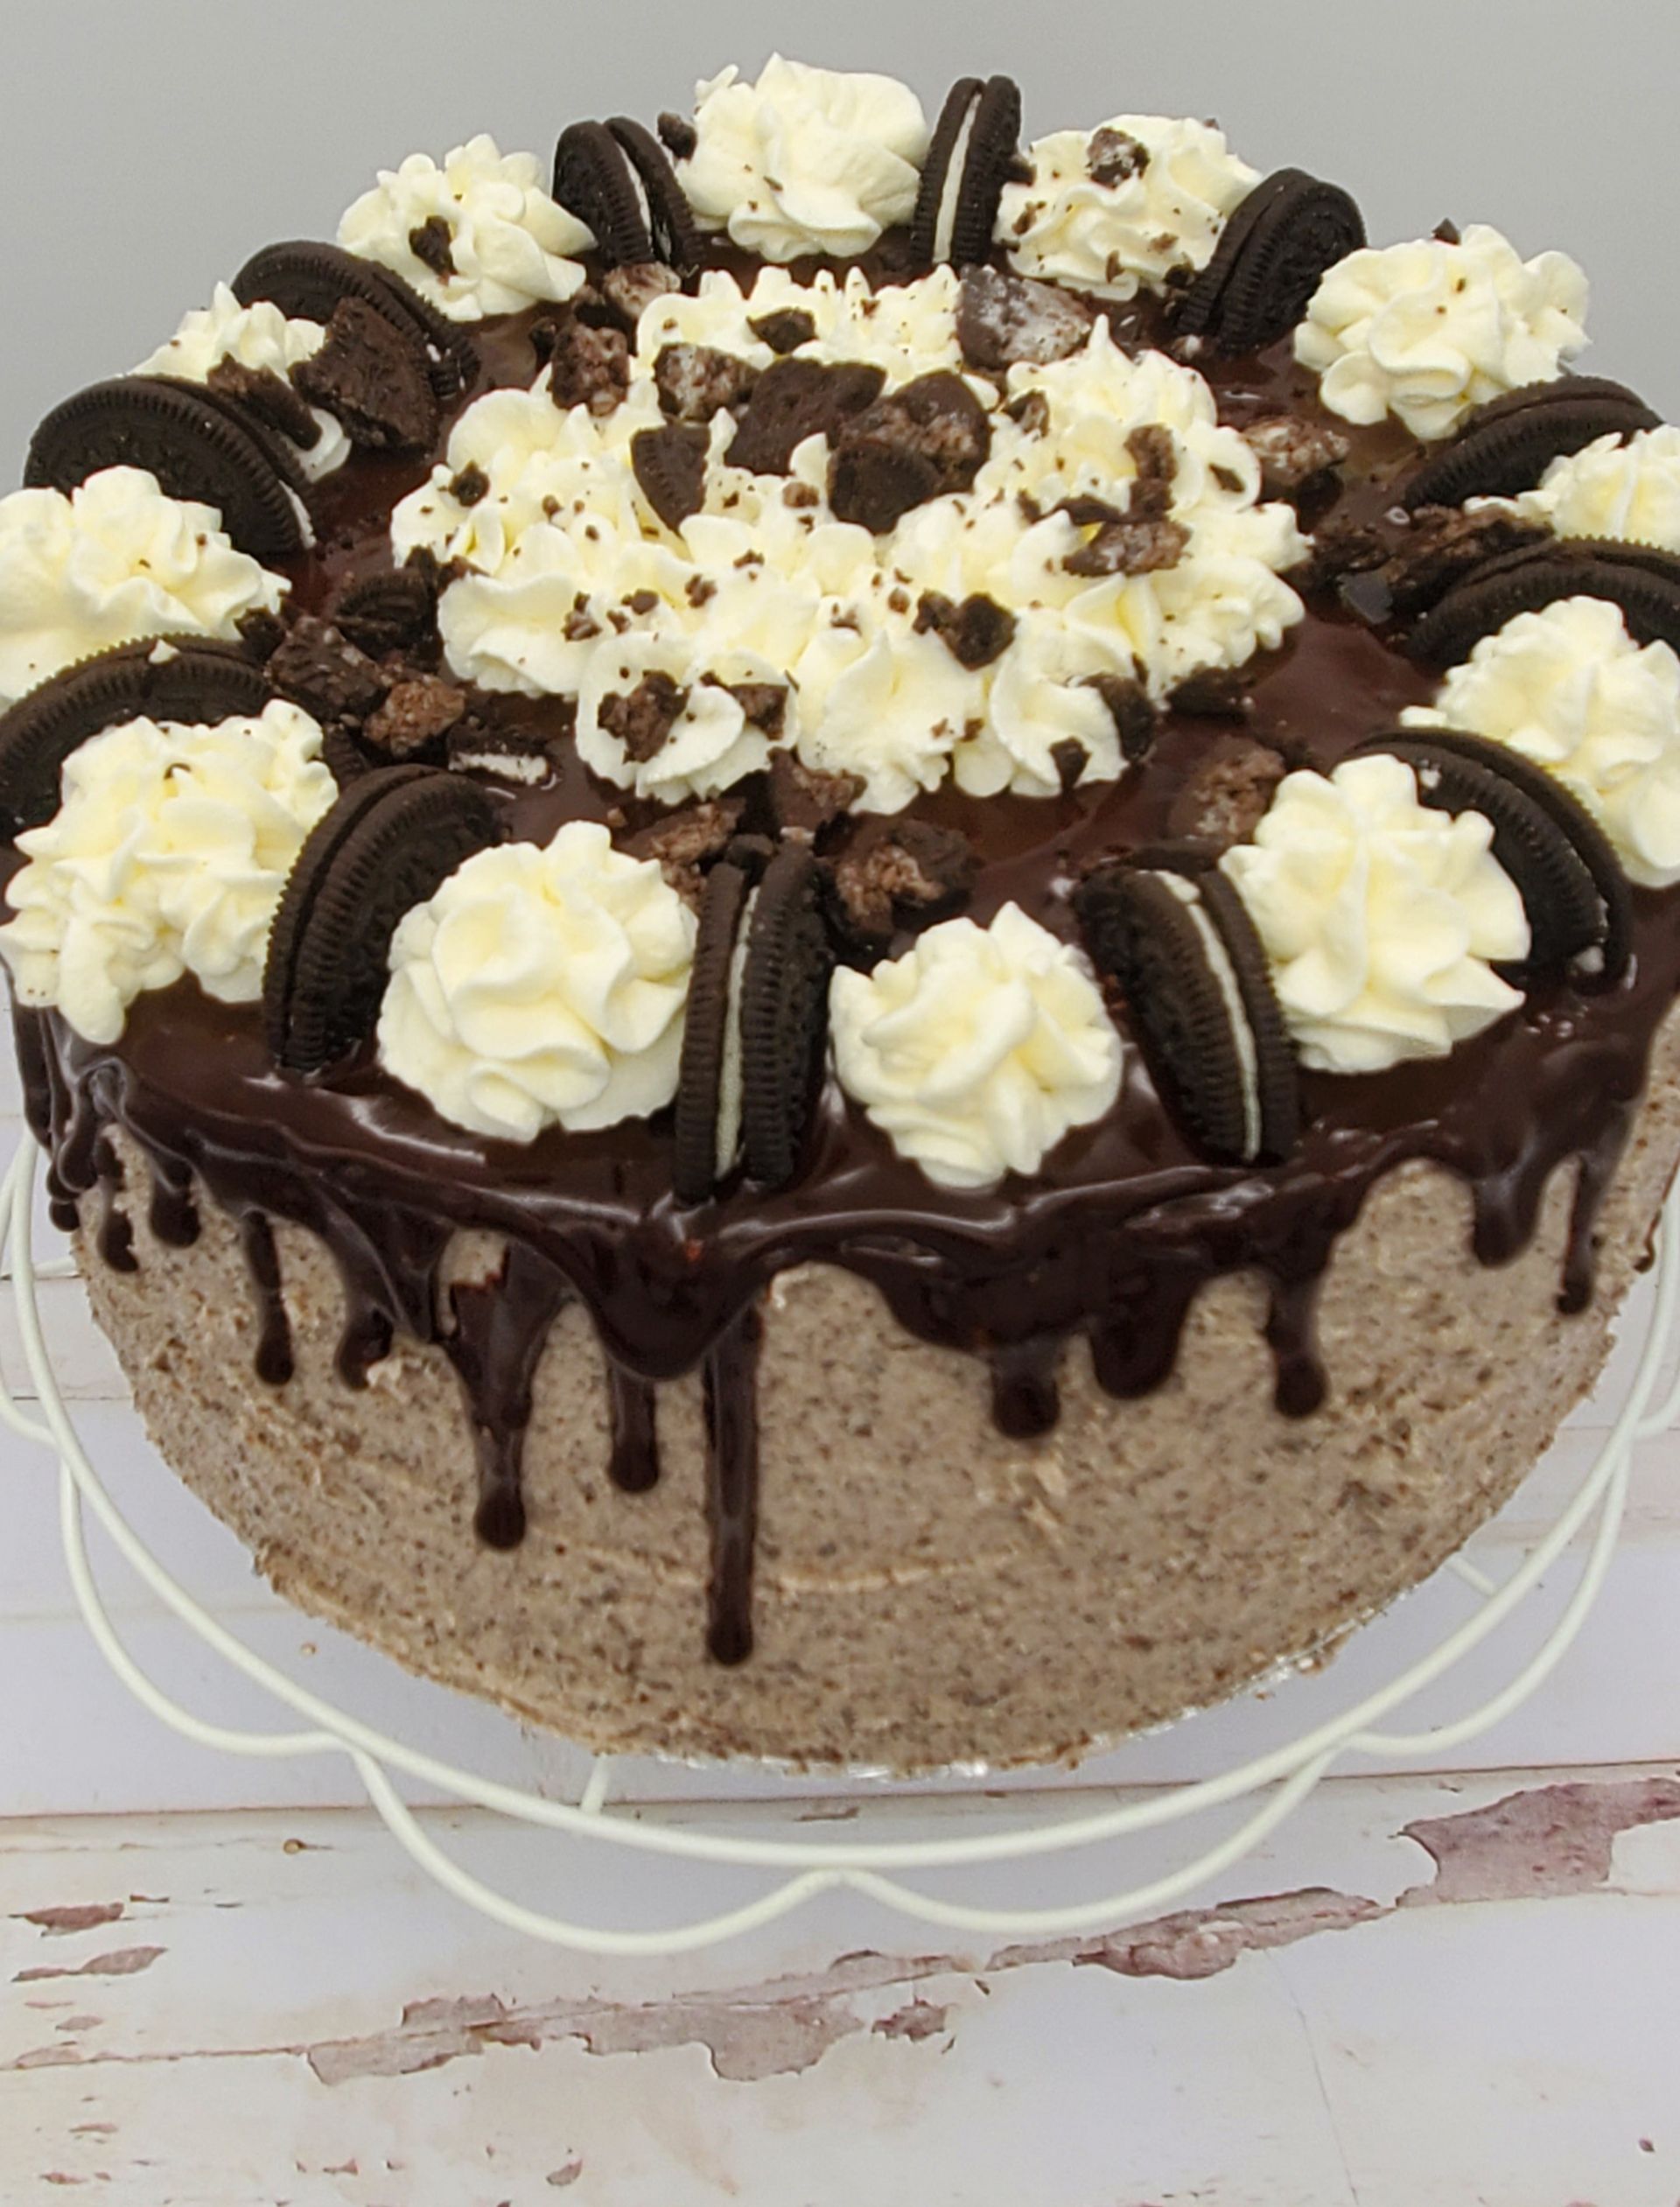 A chocolate cake with oreos and whipped cream on top